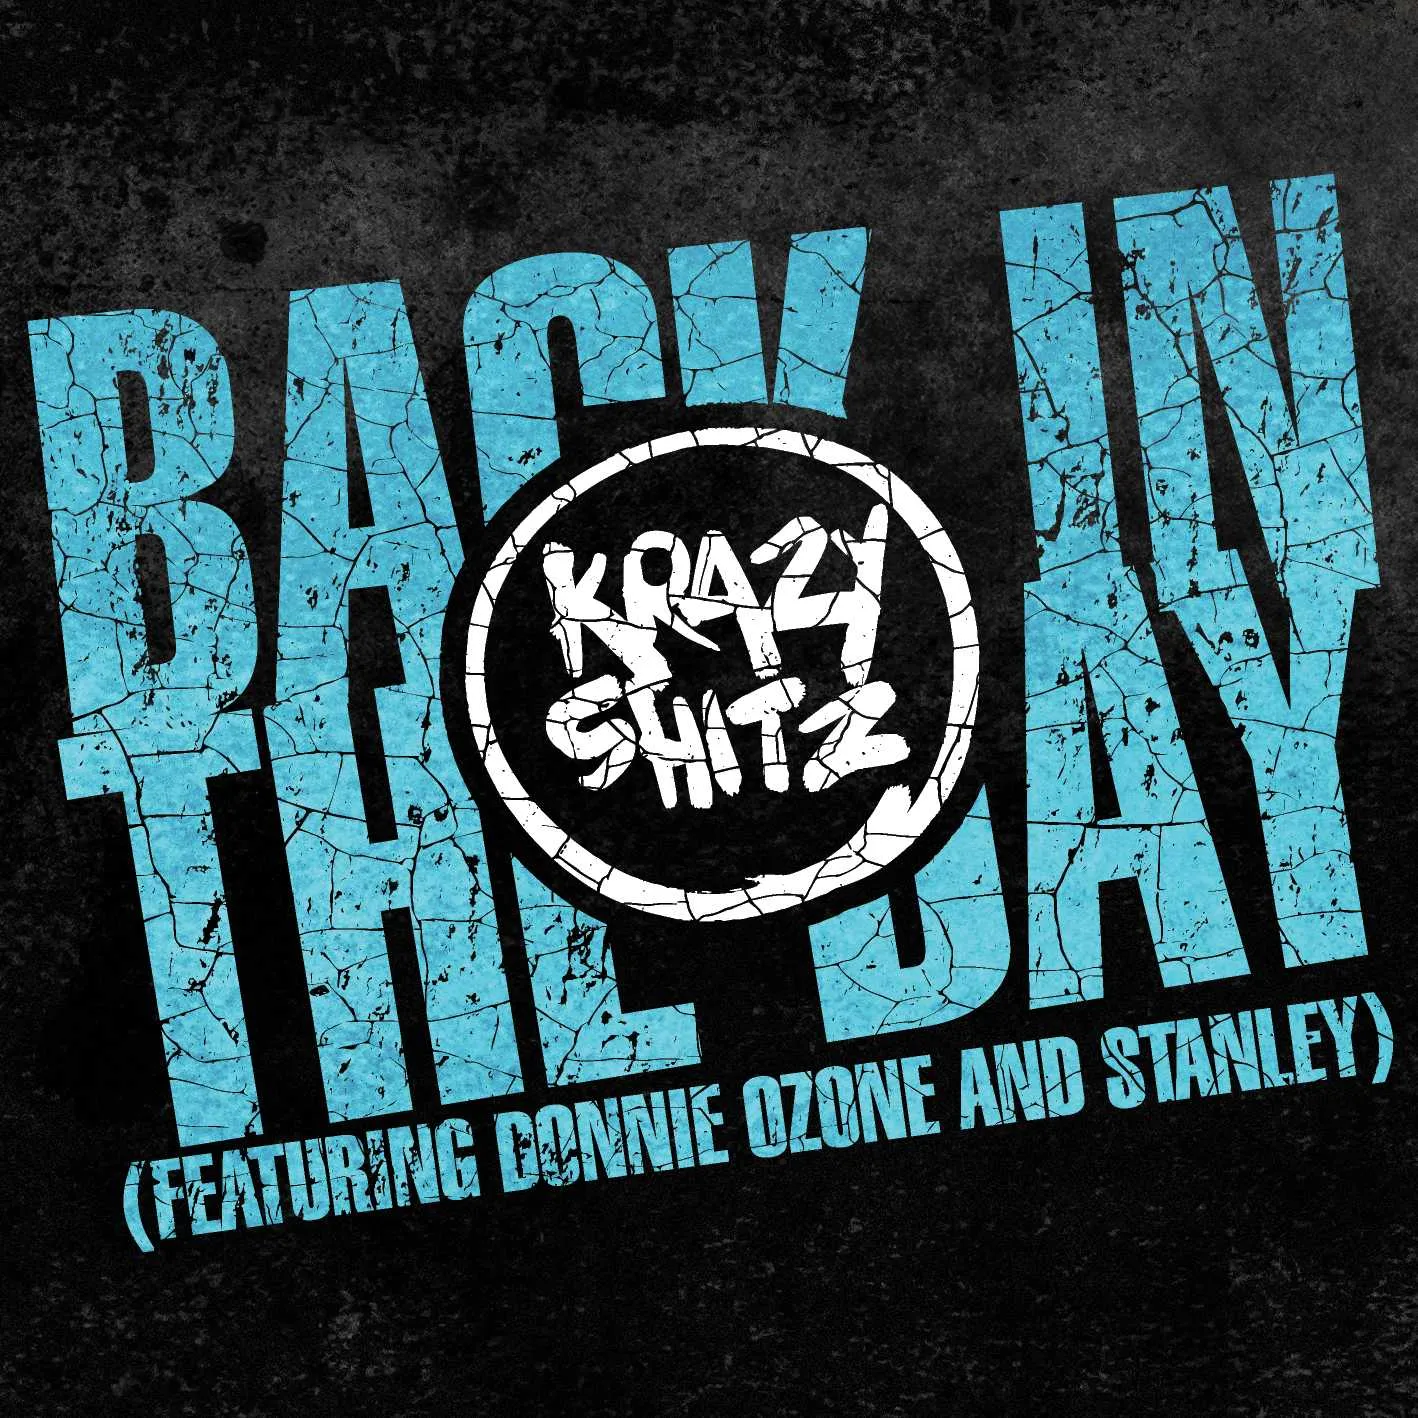 Album cover for “Back In The Day (Featuring Donnie Ozone and Stanley)” by Krazy Shitz